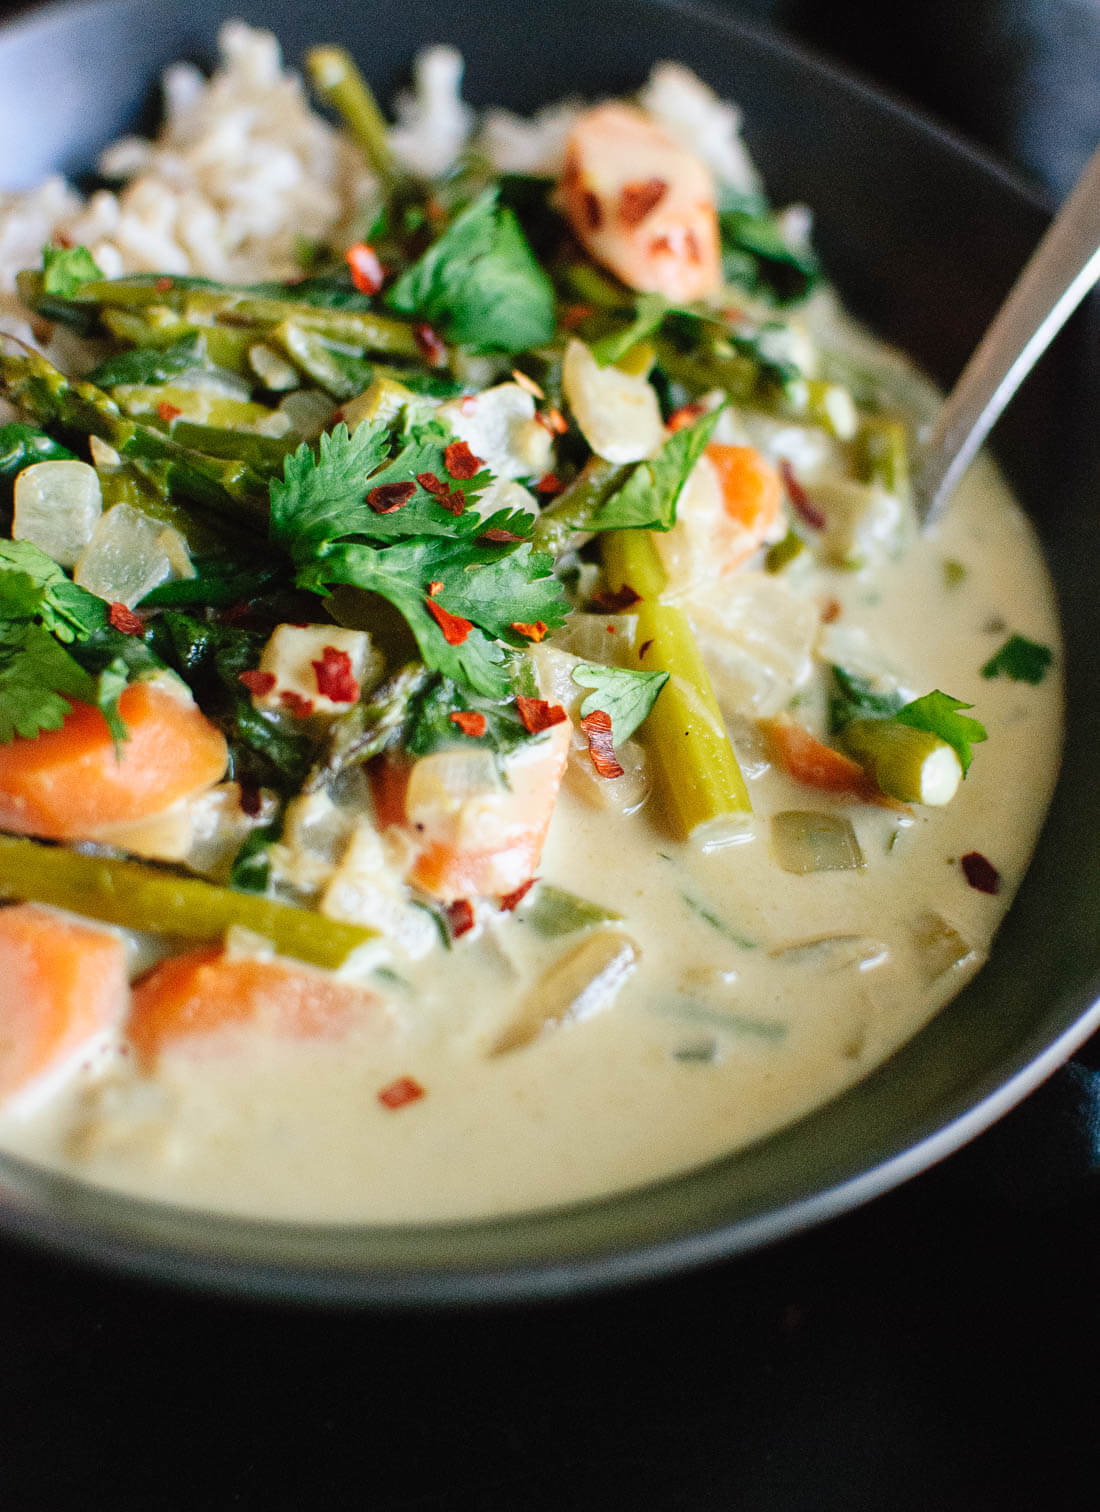 Thai green curry with spring vegetables - cookieandkate.com